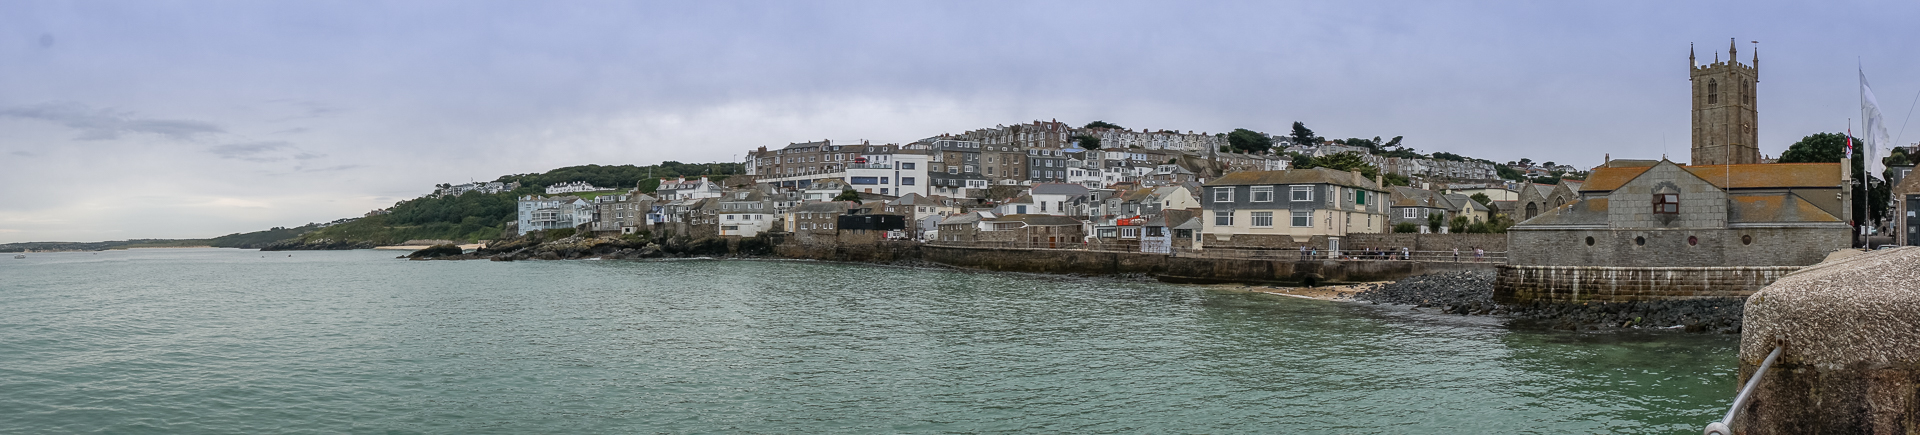 Panorama St. Ives mit St. Ia’s Church